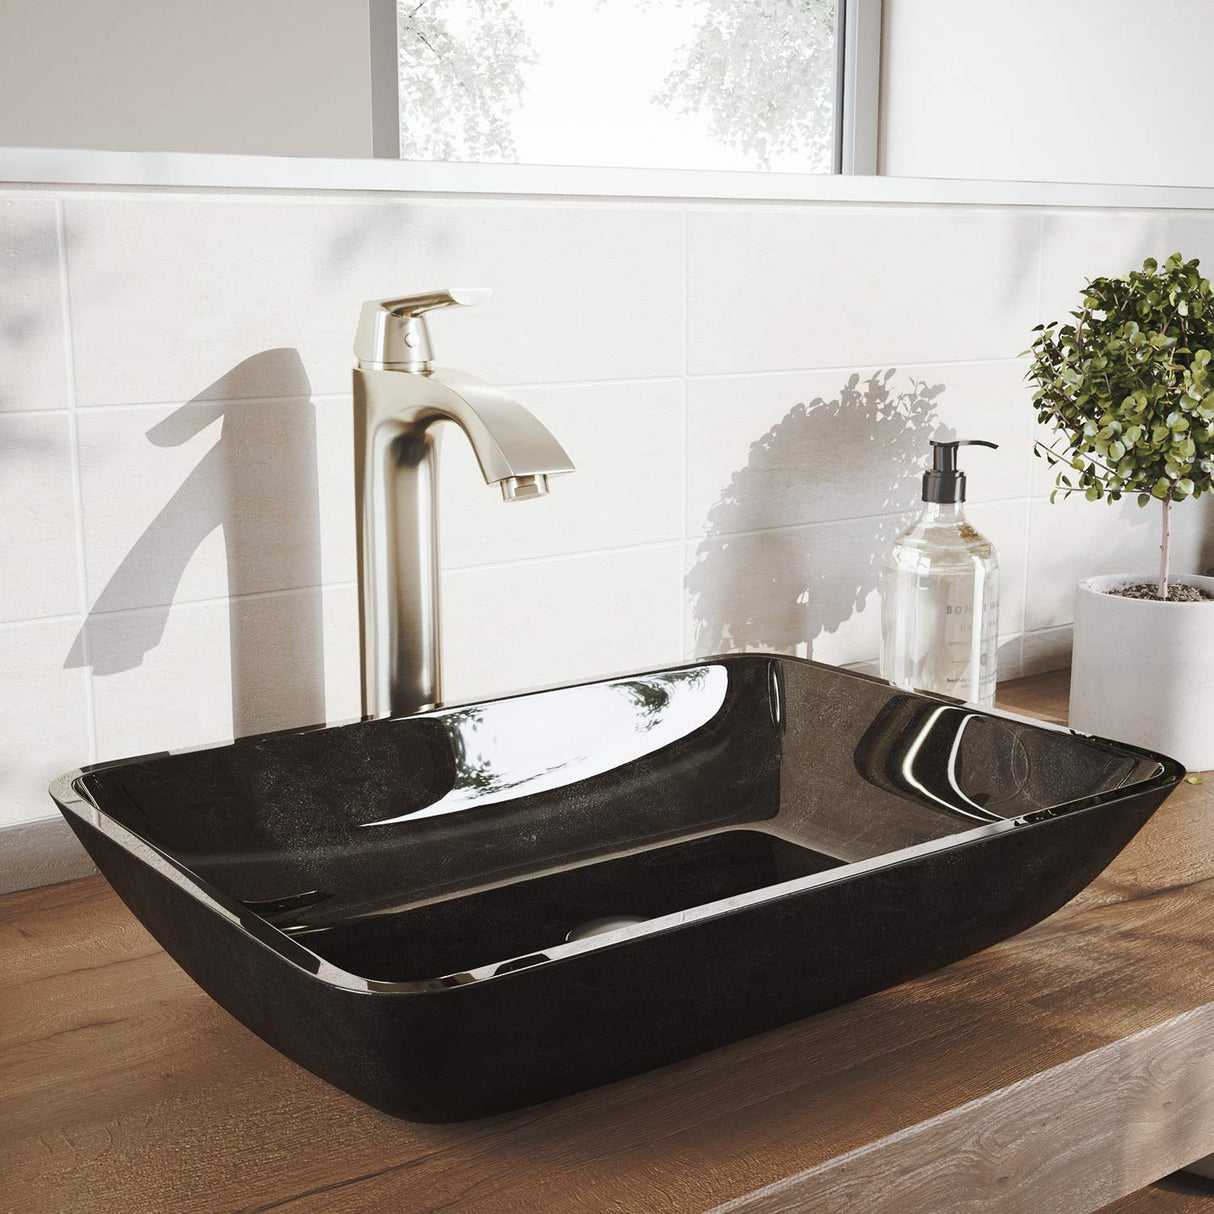 VIGO VGT1651 18.13" L -13.0" W -12.38" H Glass Rectangular Vessel Bathroom Sink in Onyx Gray with Linus Faucet and Pop-Up Drain in Brushed Nickel